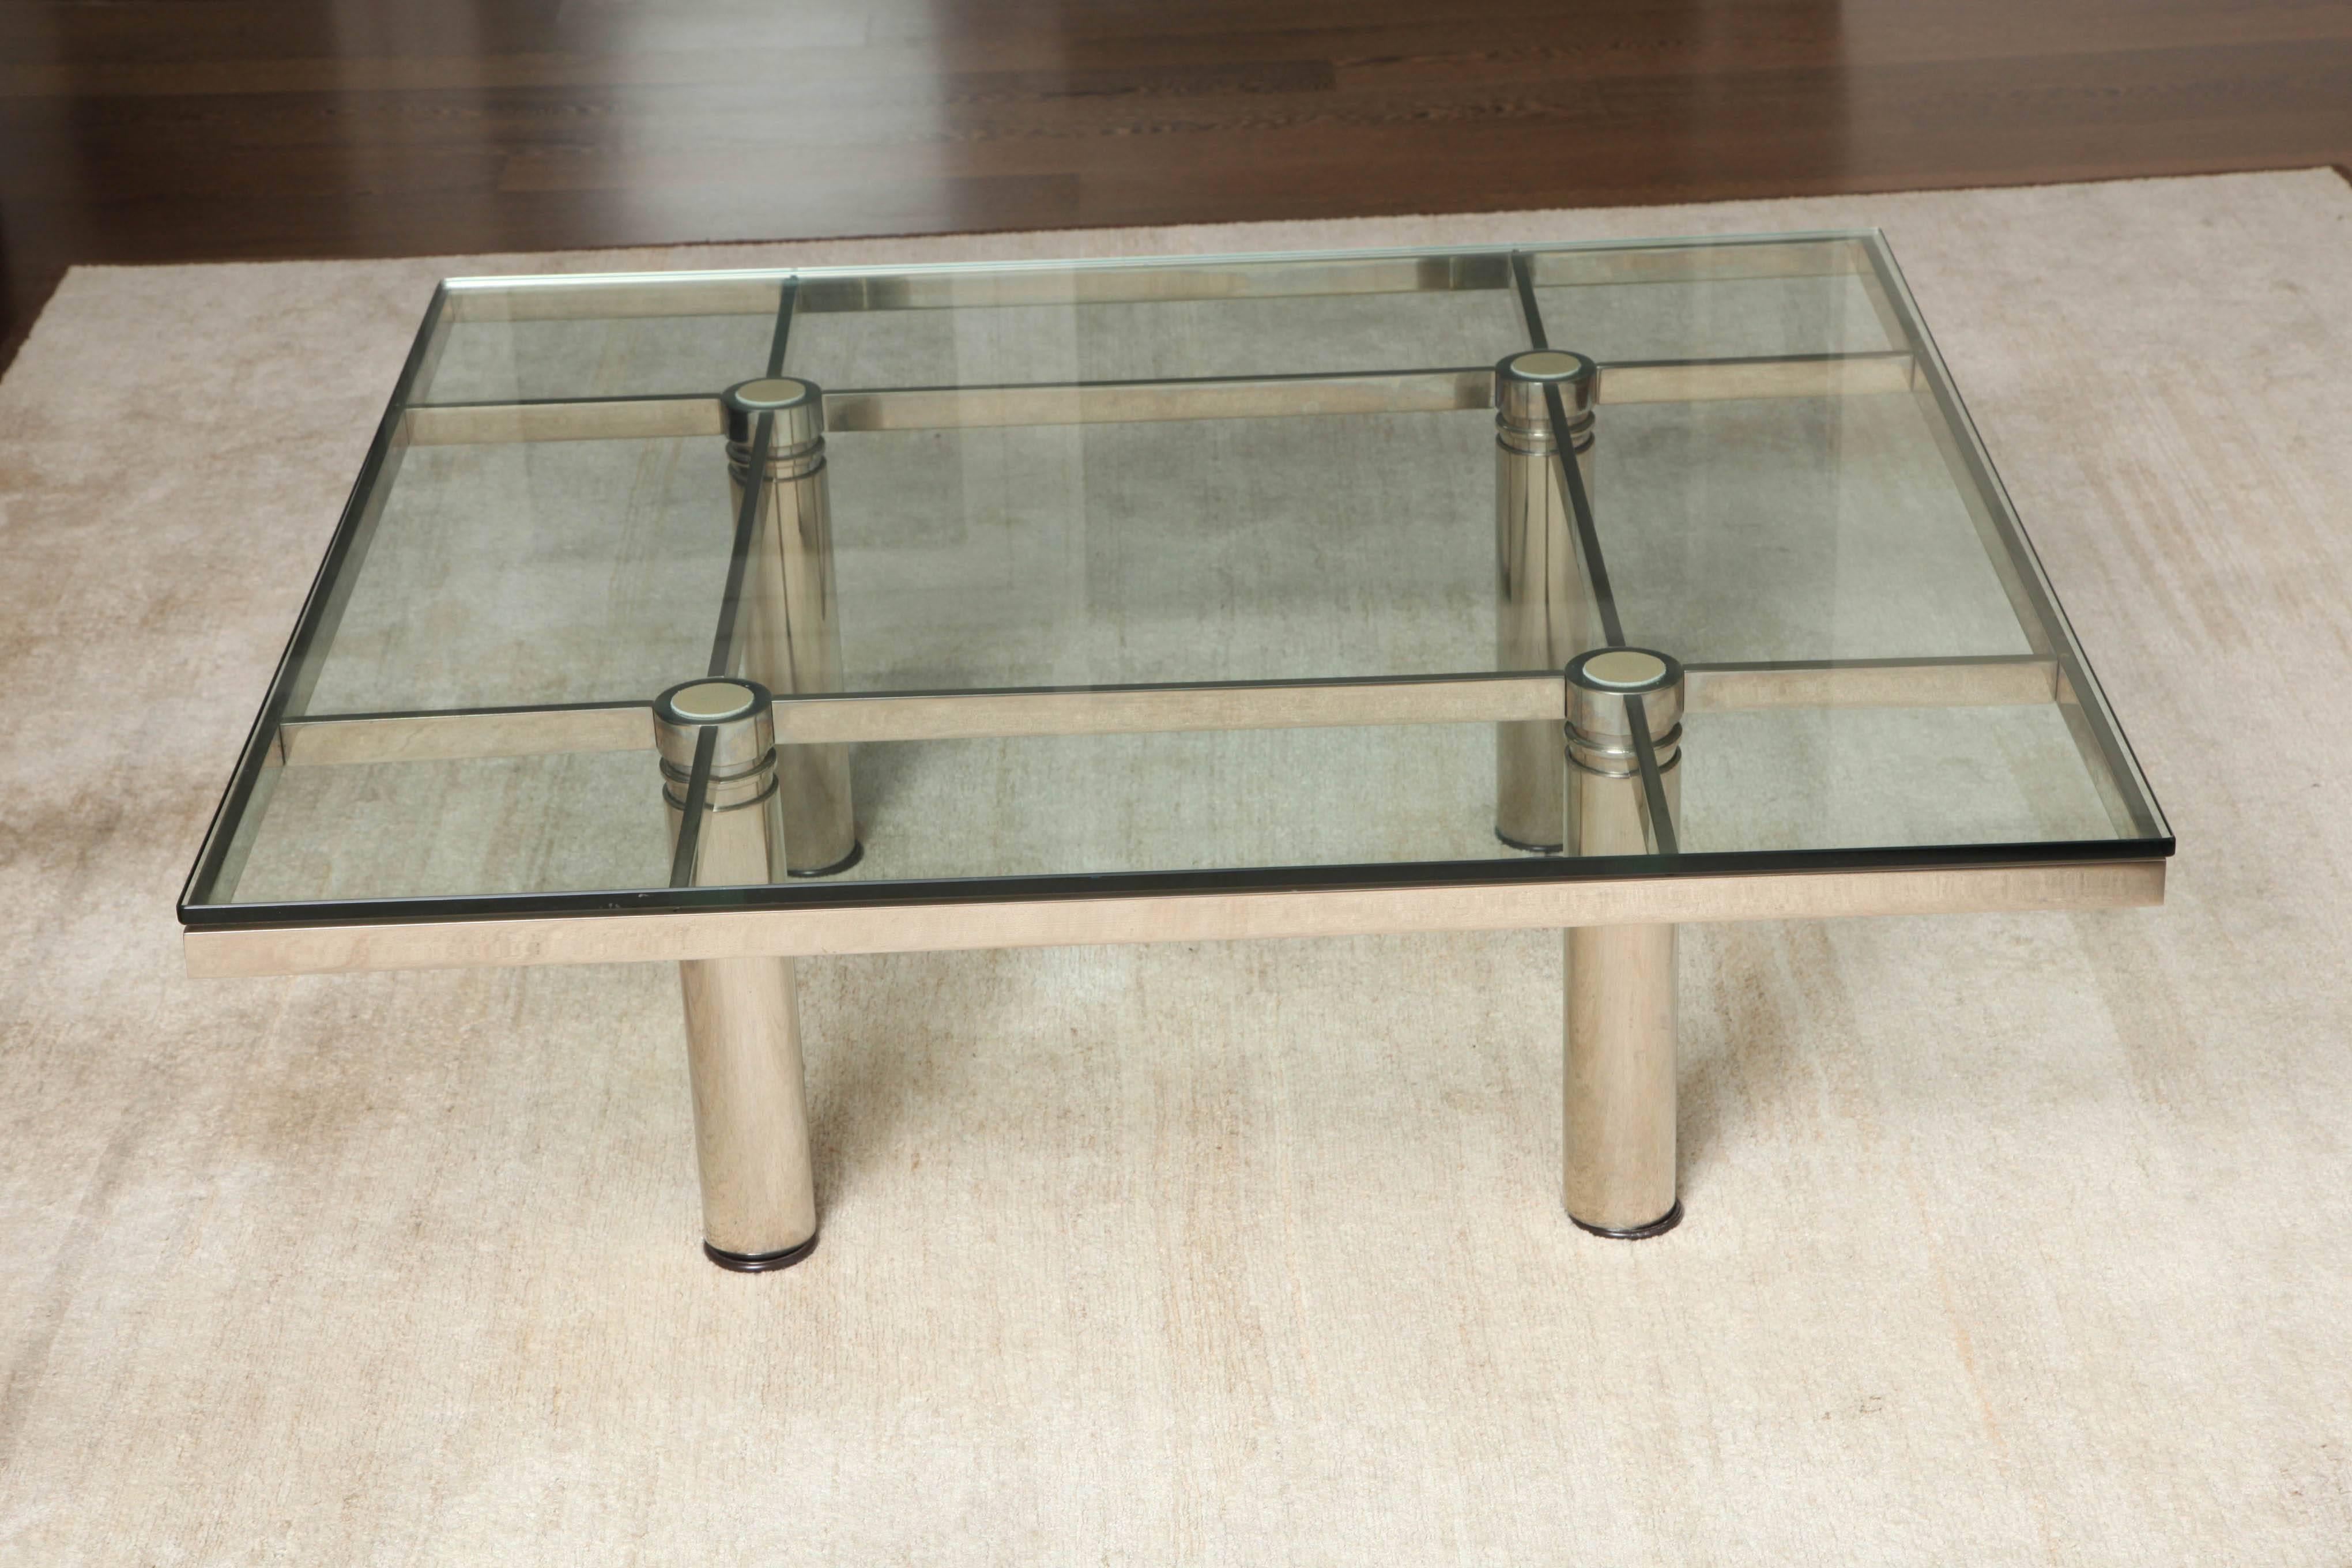 Chrome-plated steel table inset with a glass top supported on four round legs topped with leather inserts.